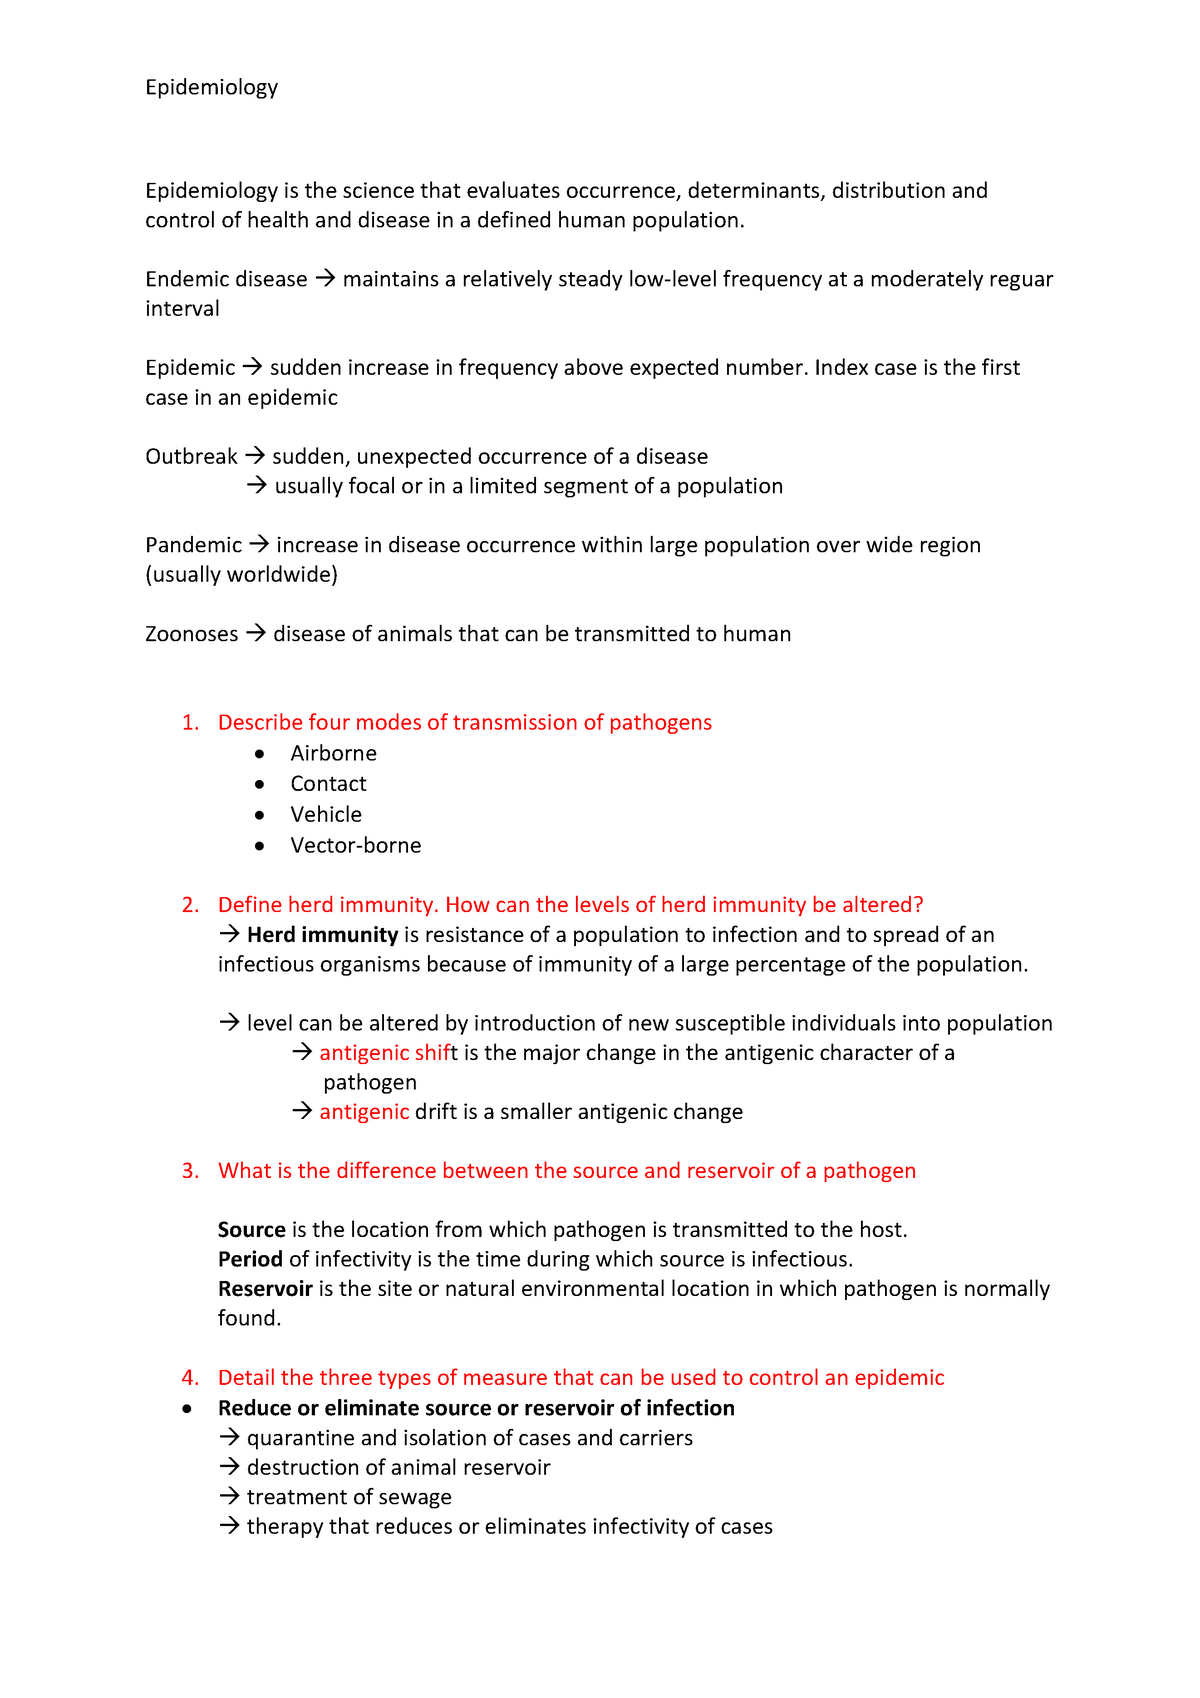 epidemiology case study questions and answers pdf